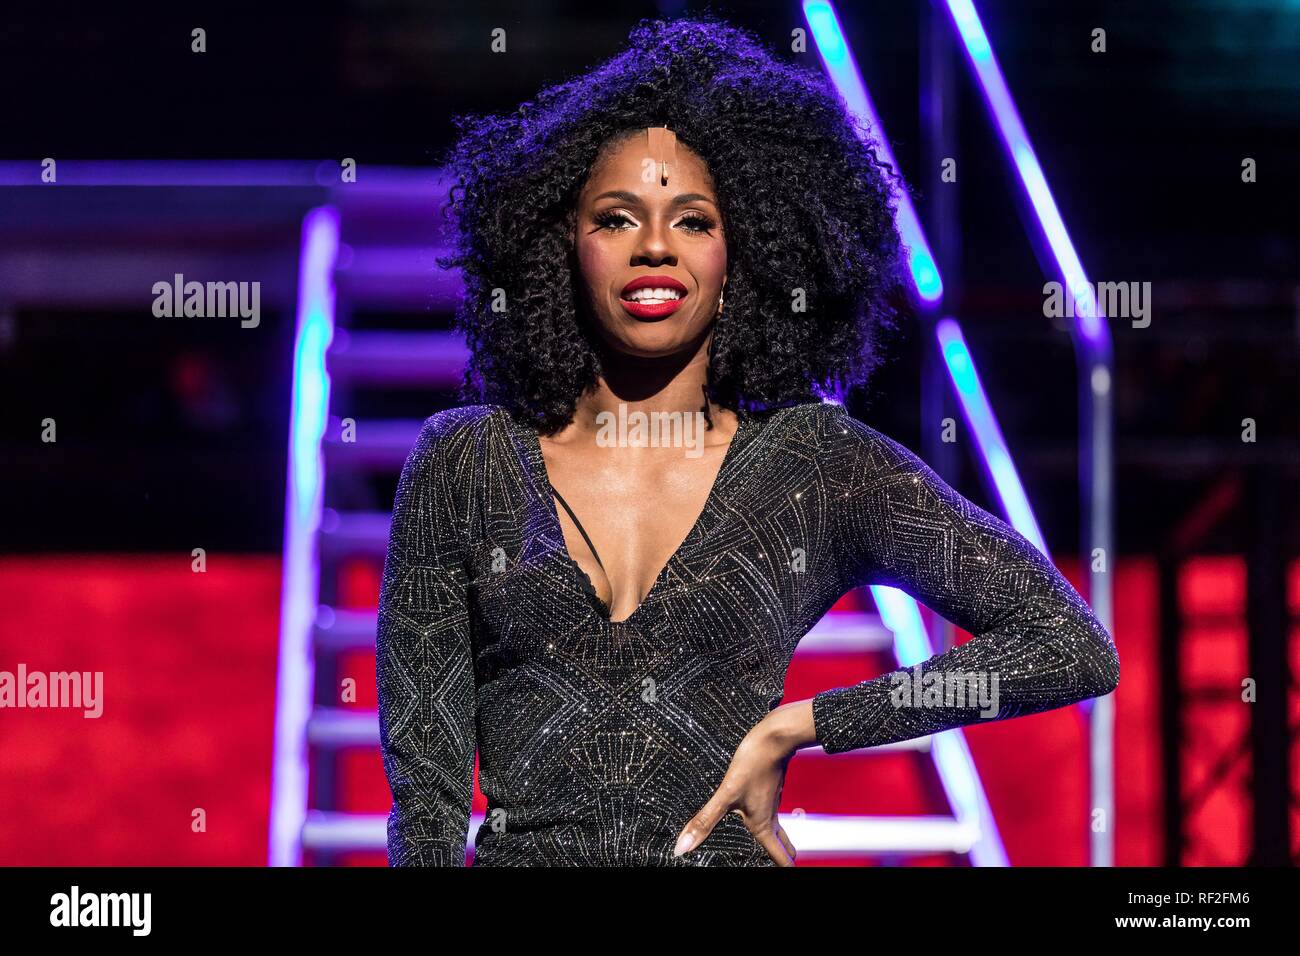 The leading actress Sidonie Smith as Deloris van Cartier live on Sister Act, The Musical held at Le Théâtre in Emmen, Lucerne Stock Photo